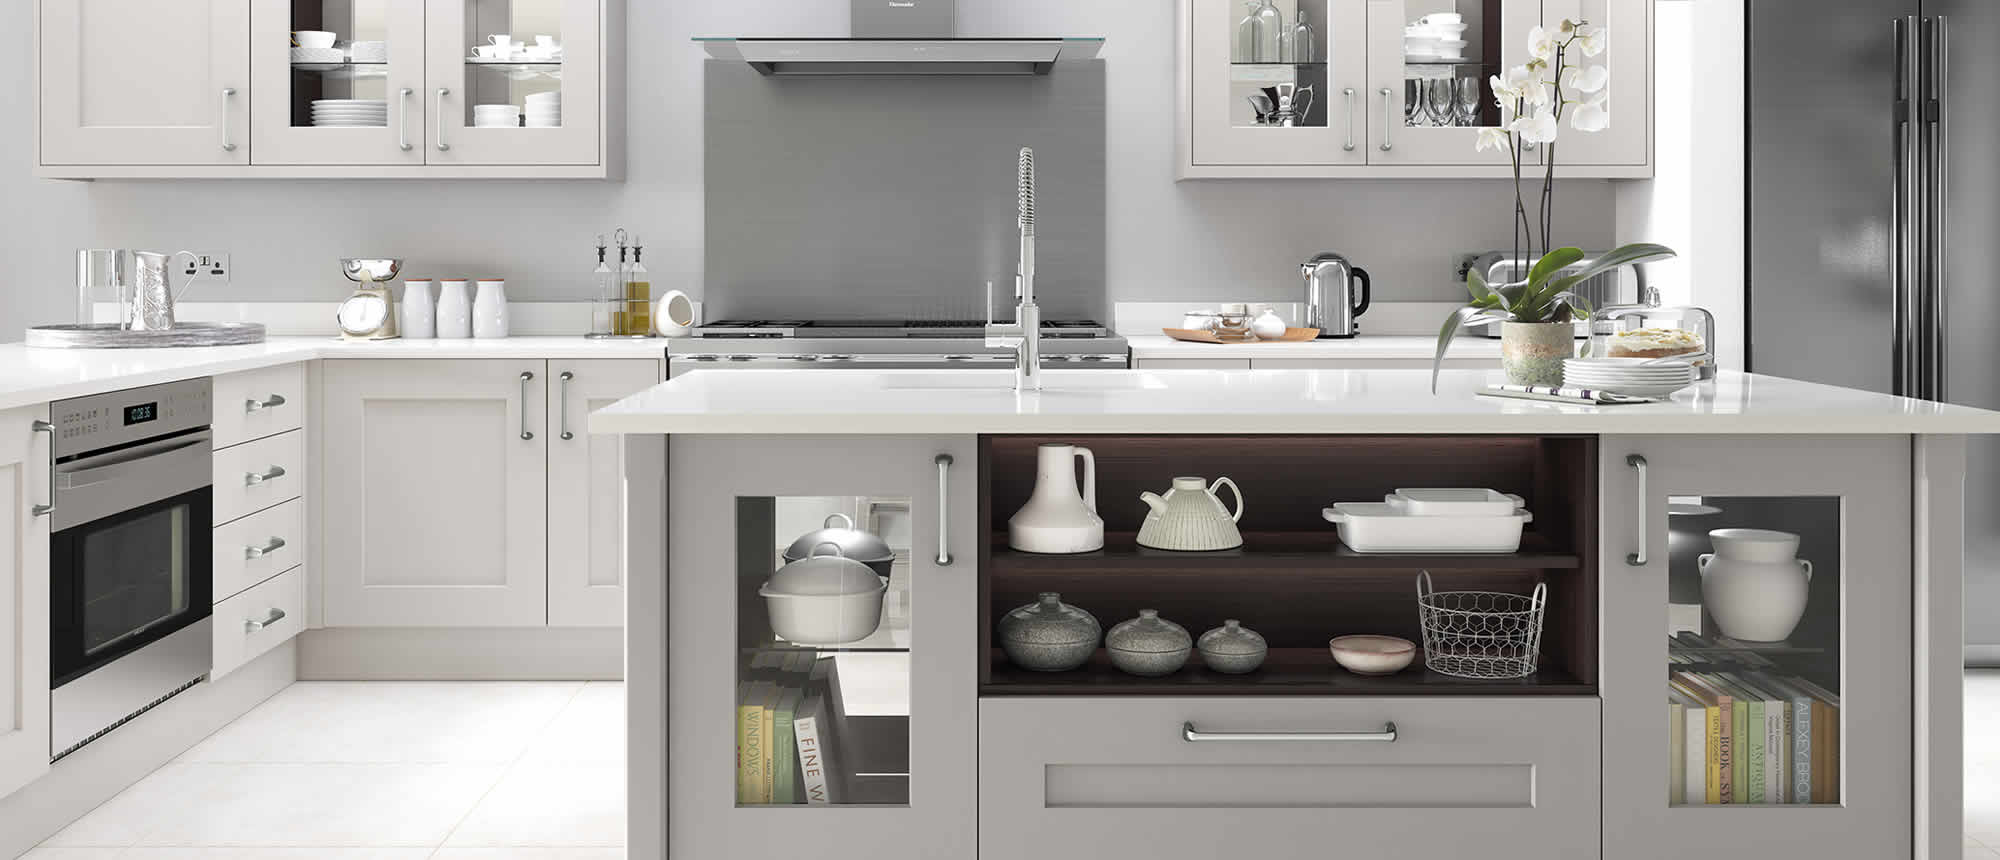 Halcyon Kitchens - Passionate about kitchens